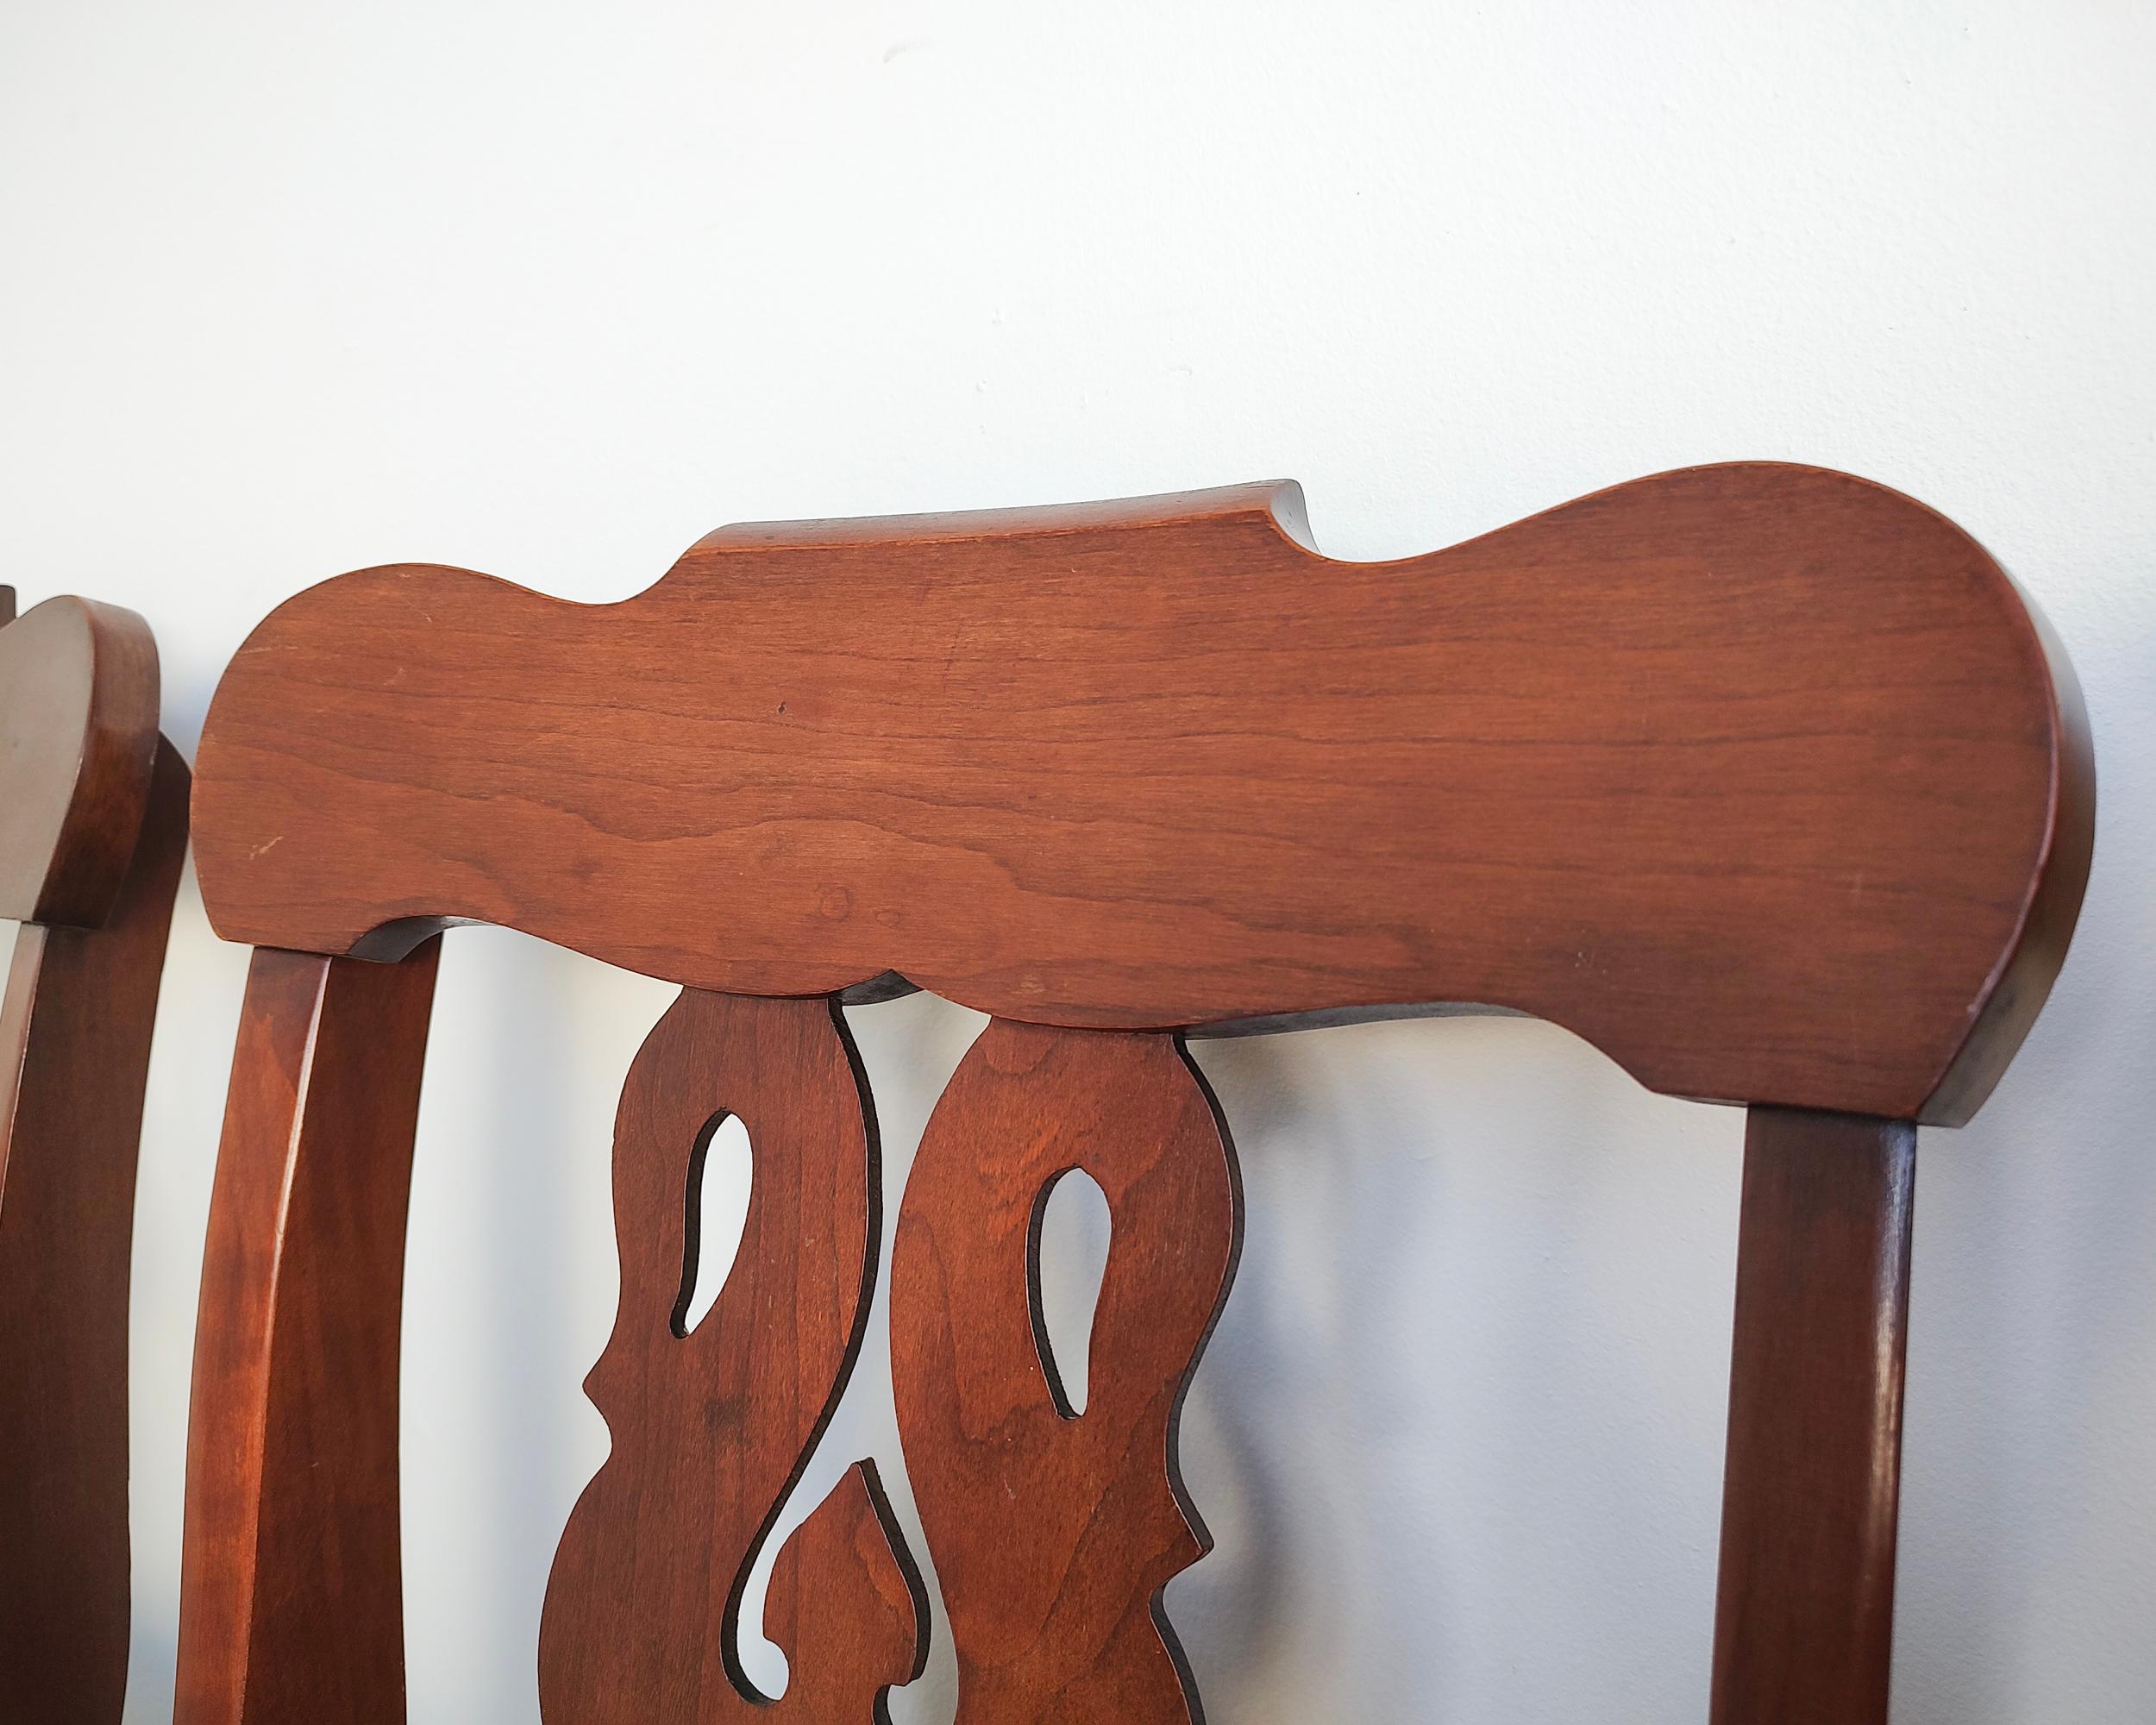 1950s Set of 4 Solid Cherry Wood Regency Style Dining Chairs In Good Condition For Sale In Hawthorne, CA